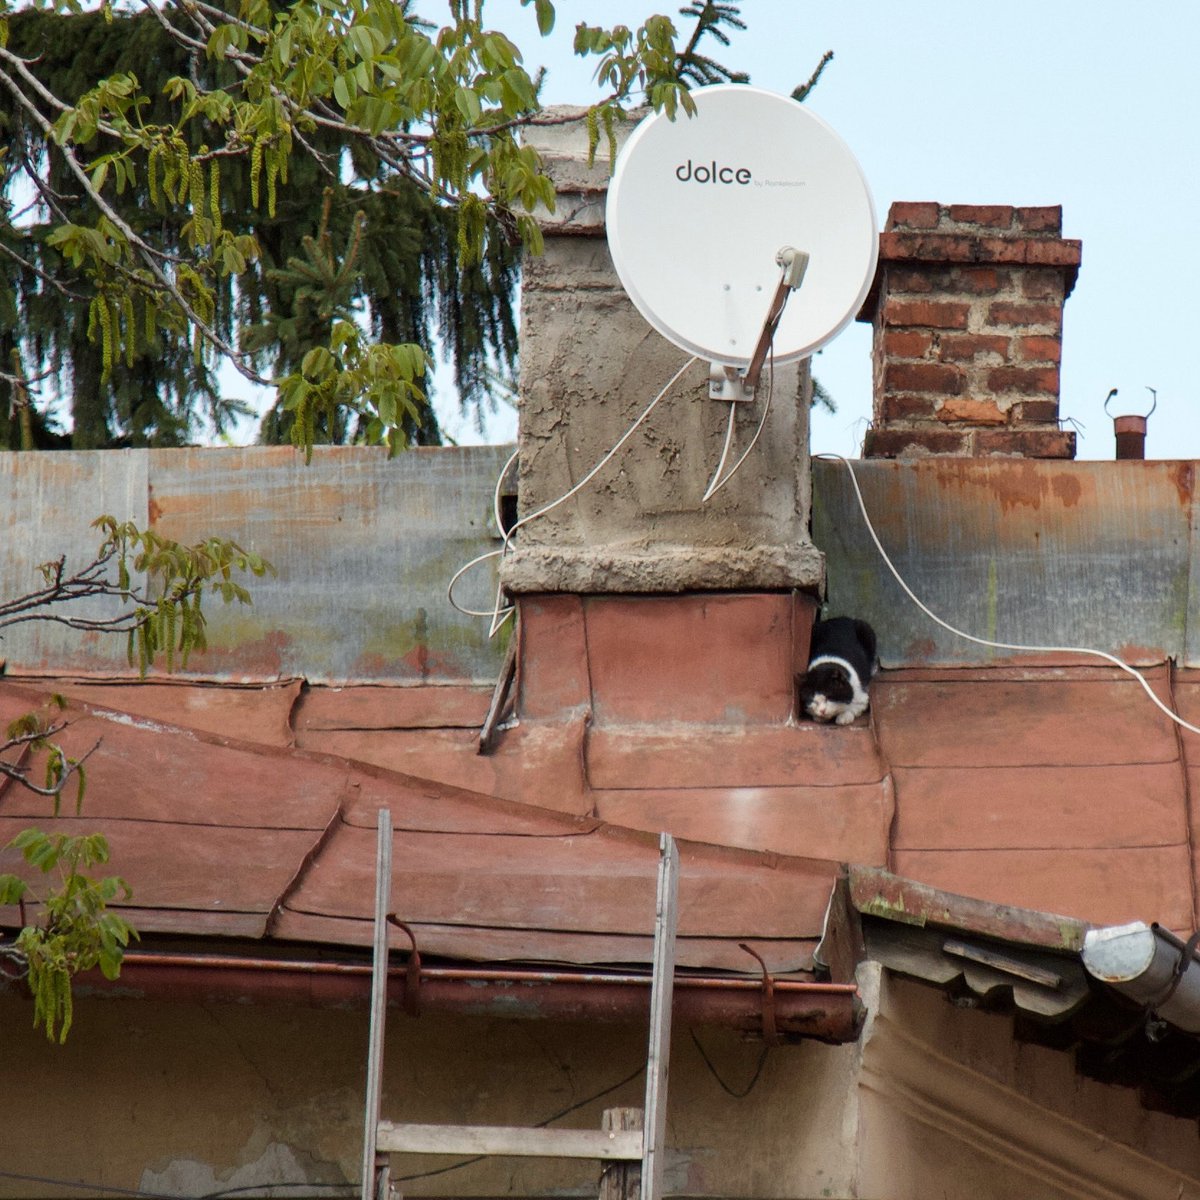 Working cat on the tin roof of one of the central Bucharest 19th c ramshackle houses. #cat #cats #bucharest #balkans #southeasteurope #casedeepoca #valentinmandache